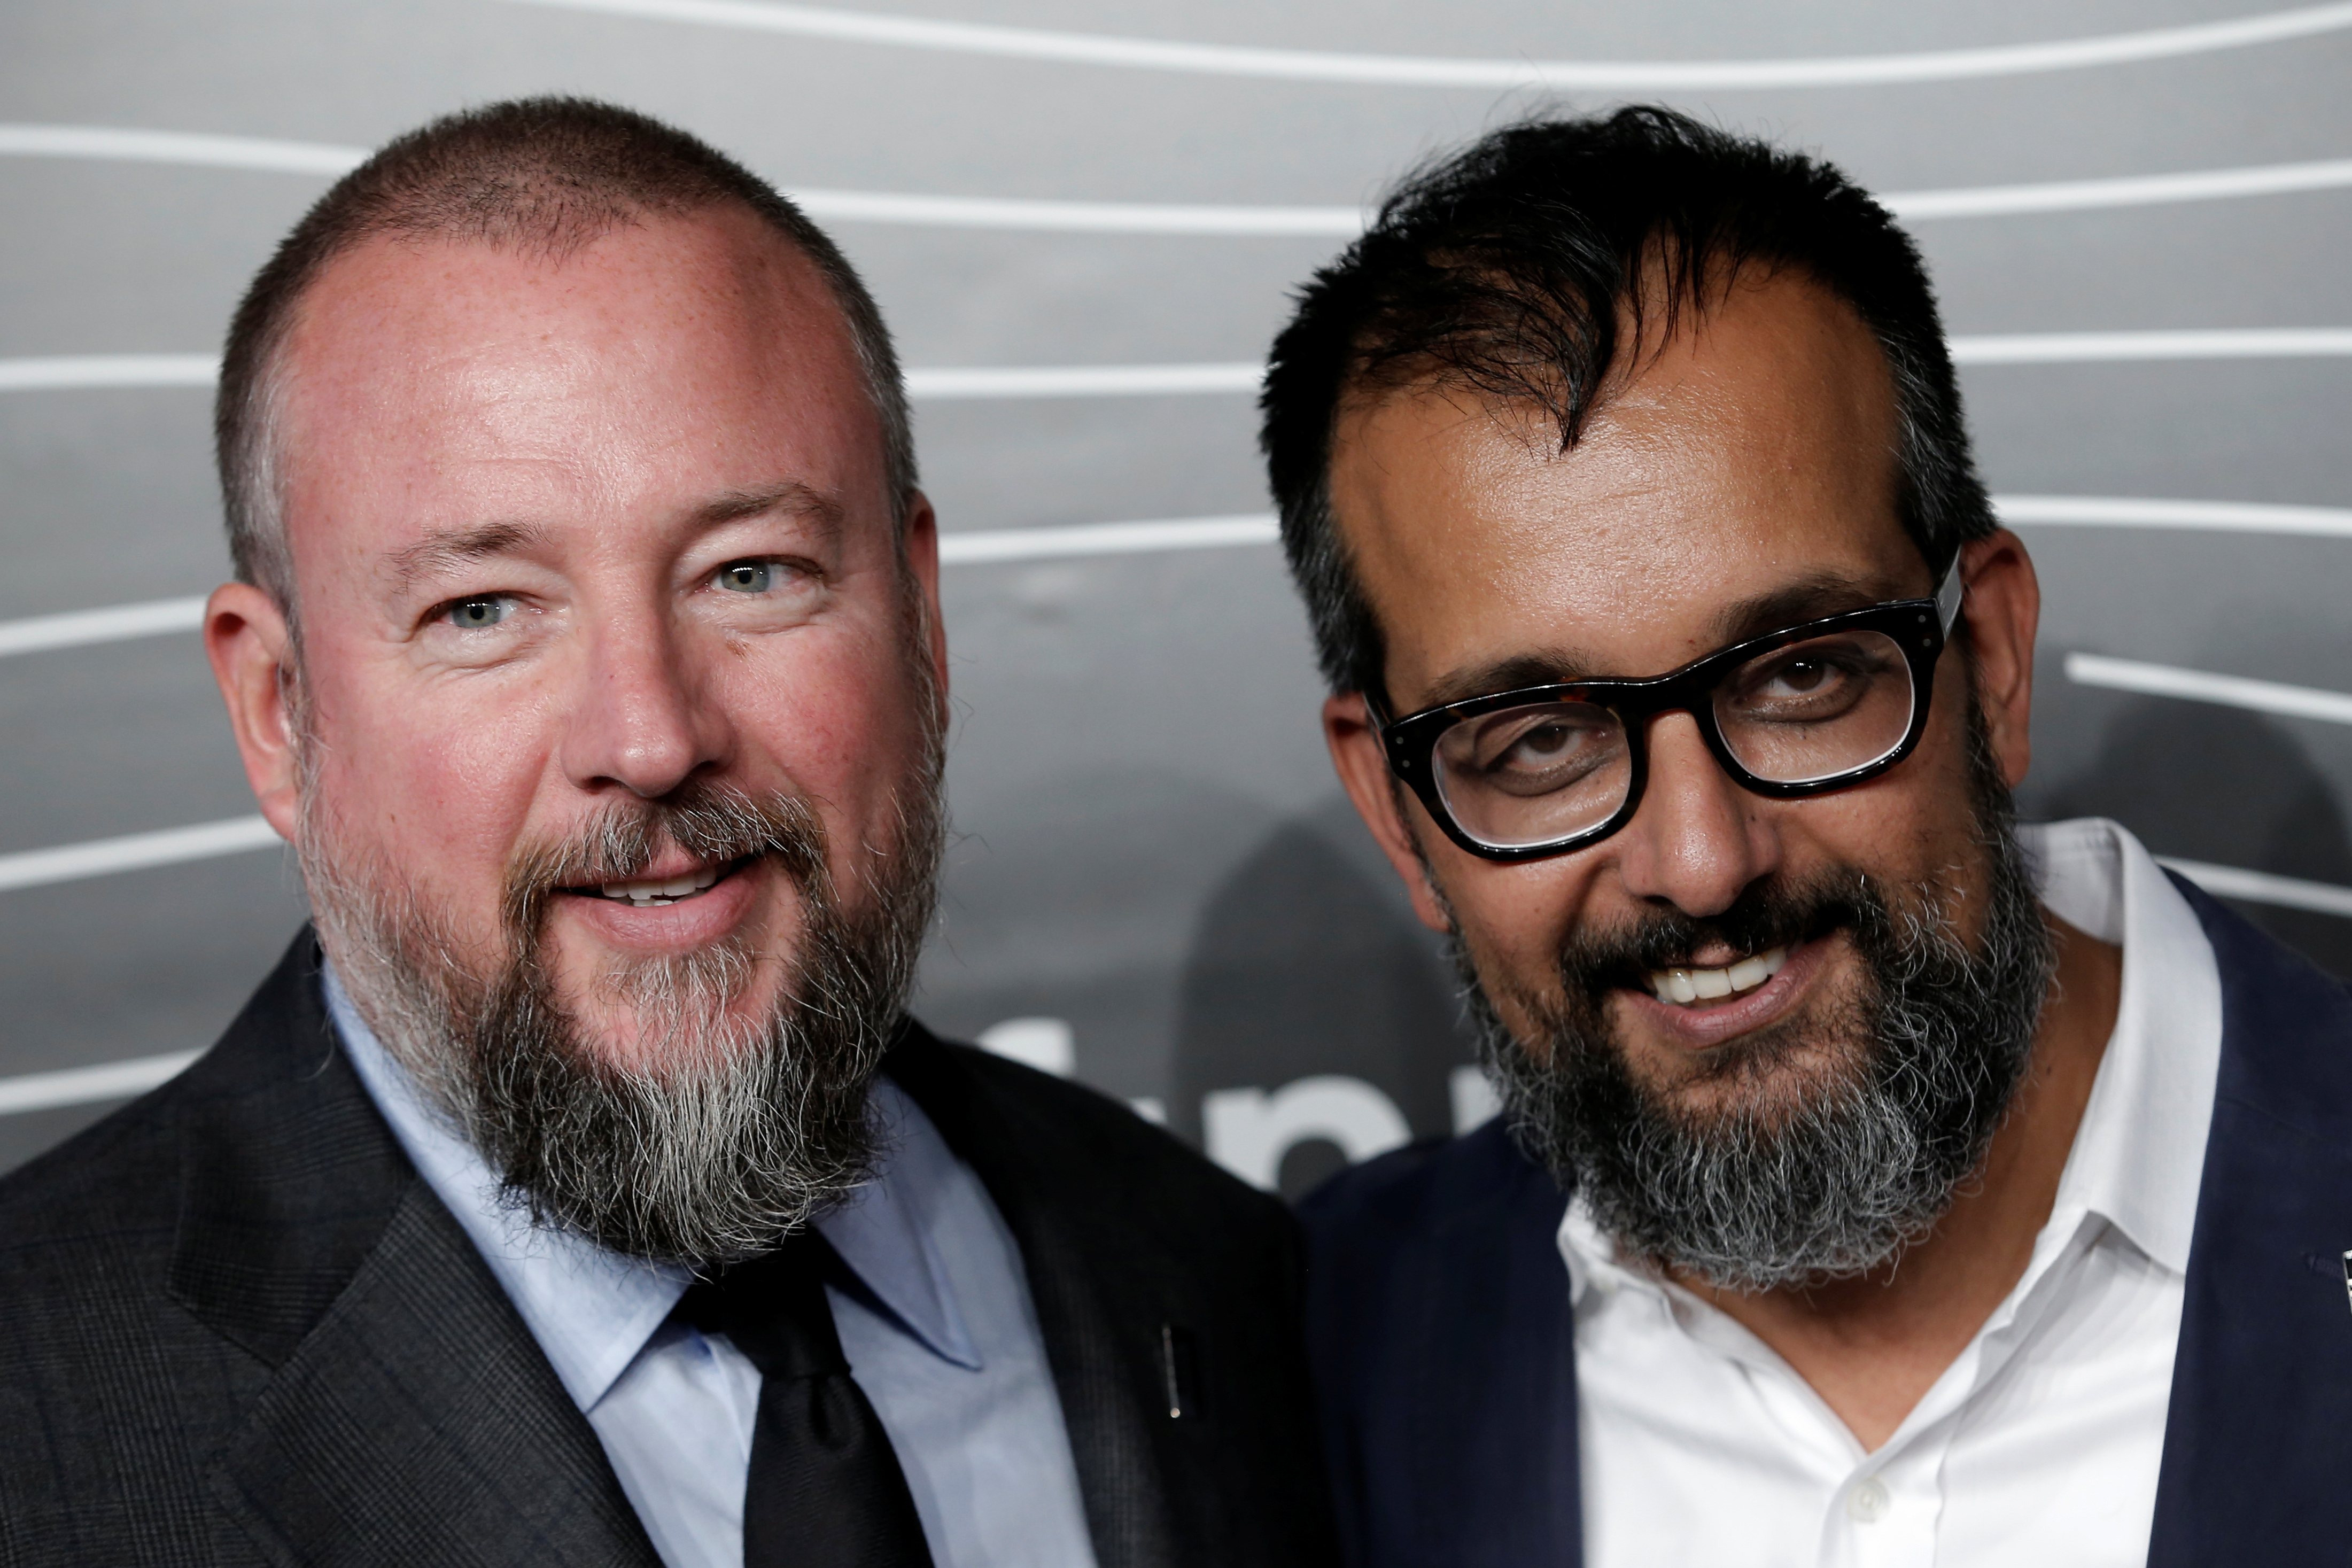 Co-Founders of VICE Shane Smith and Suroosh Alvi pose as they arrive for the 20th Annual Webby Awards in Manhattan, New York